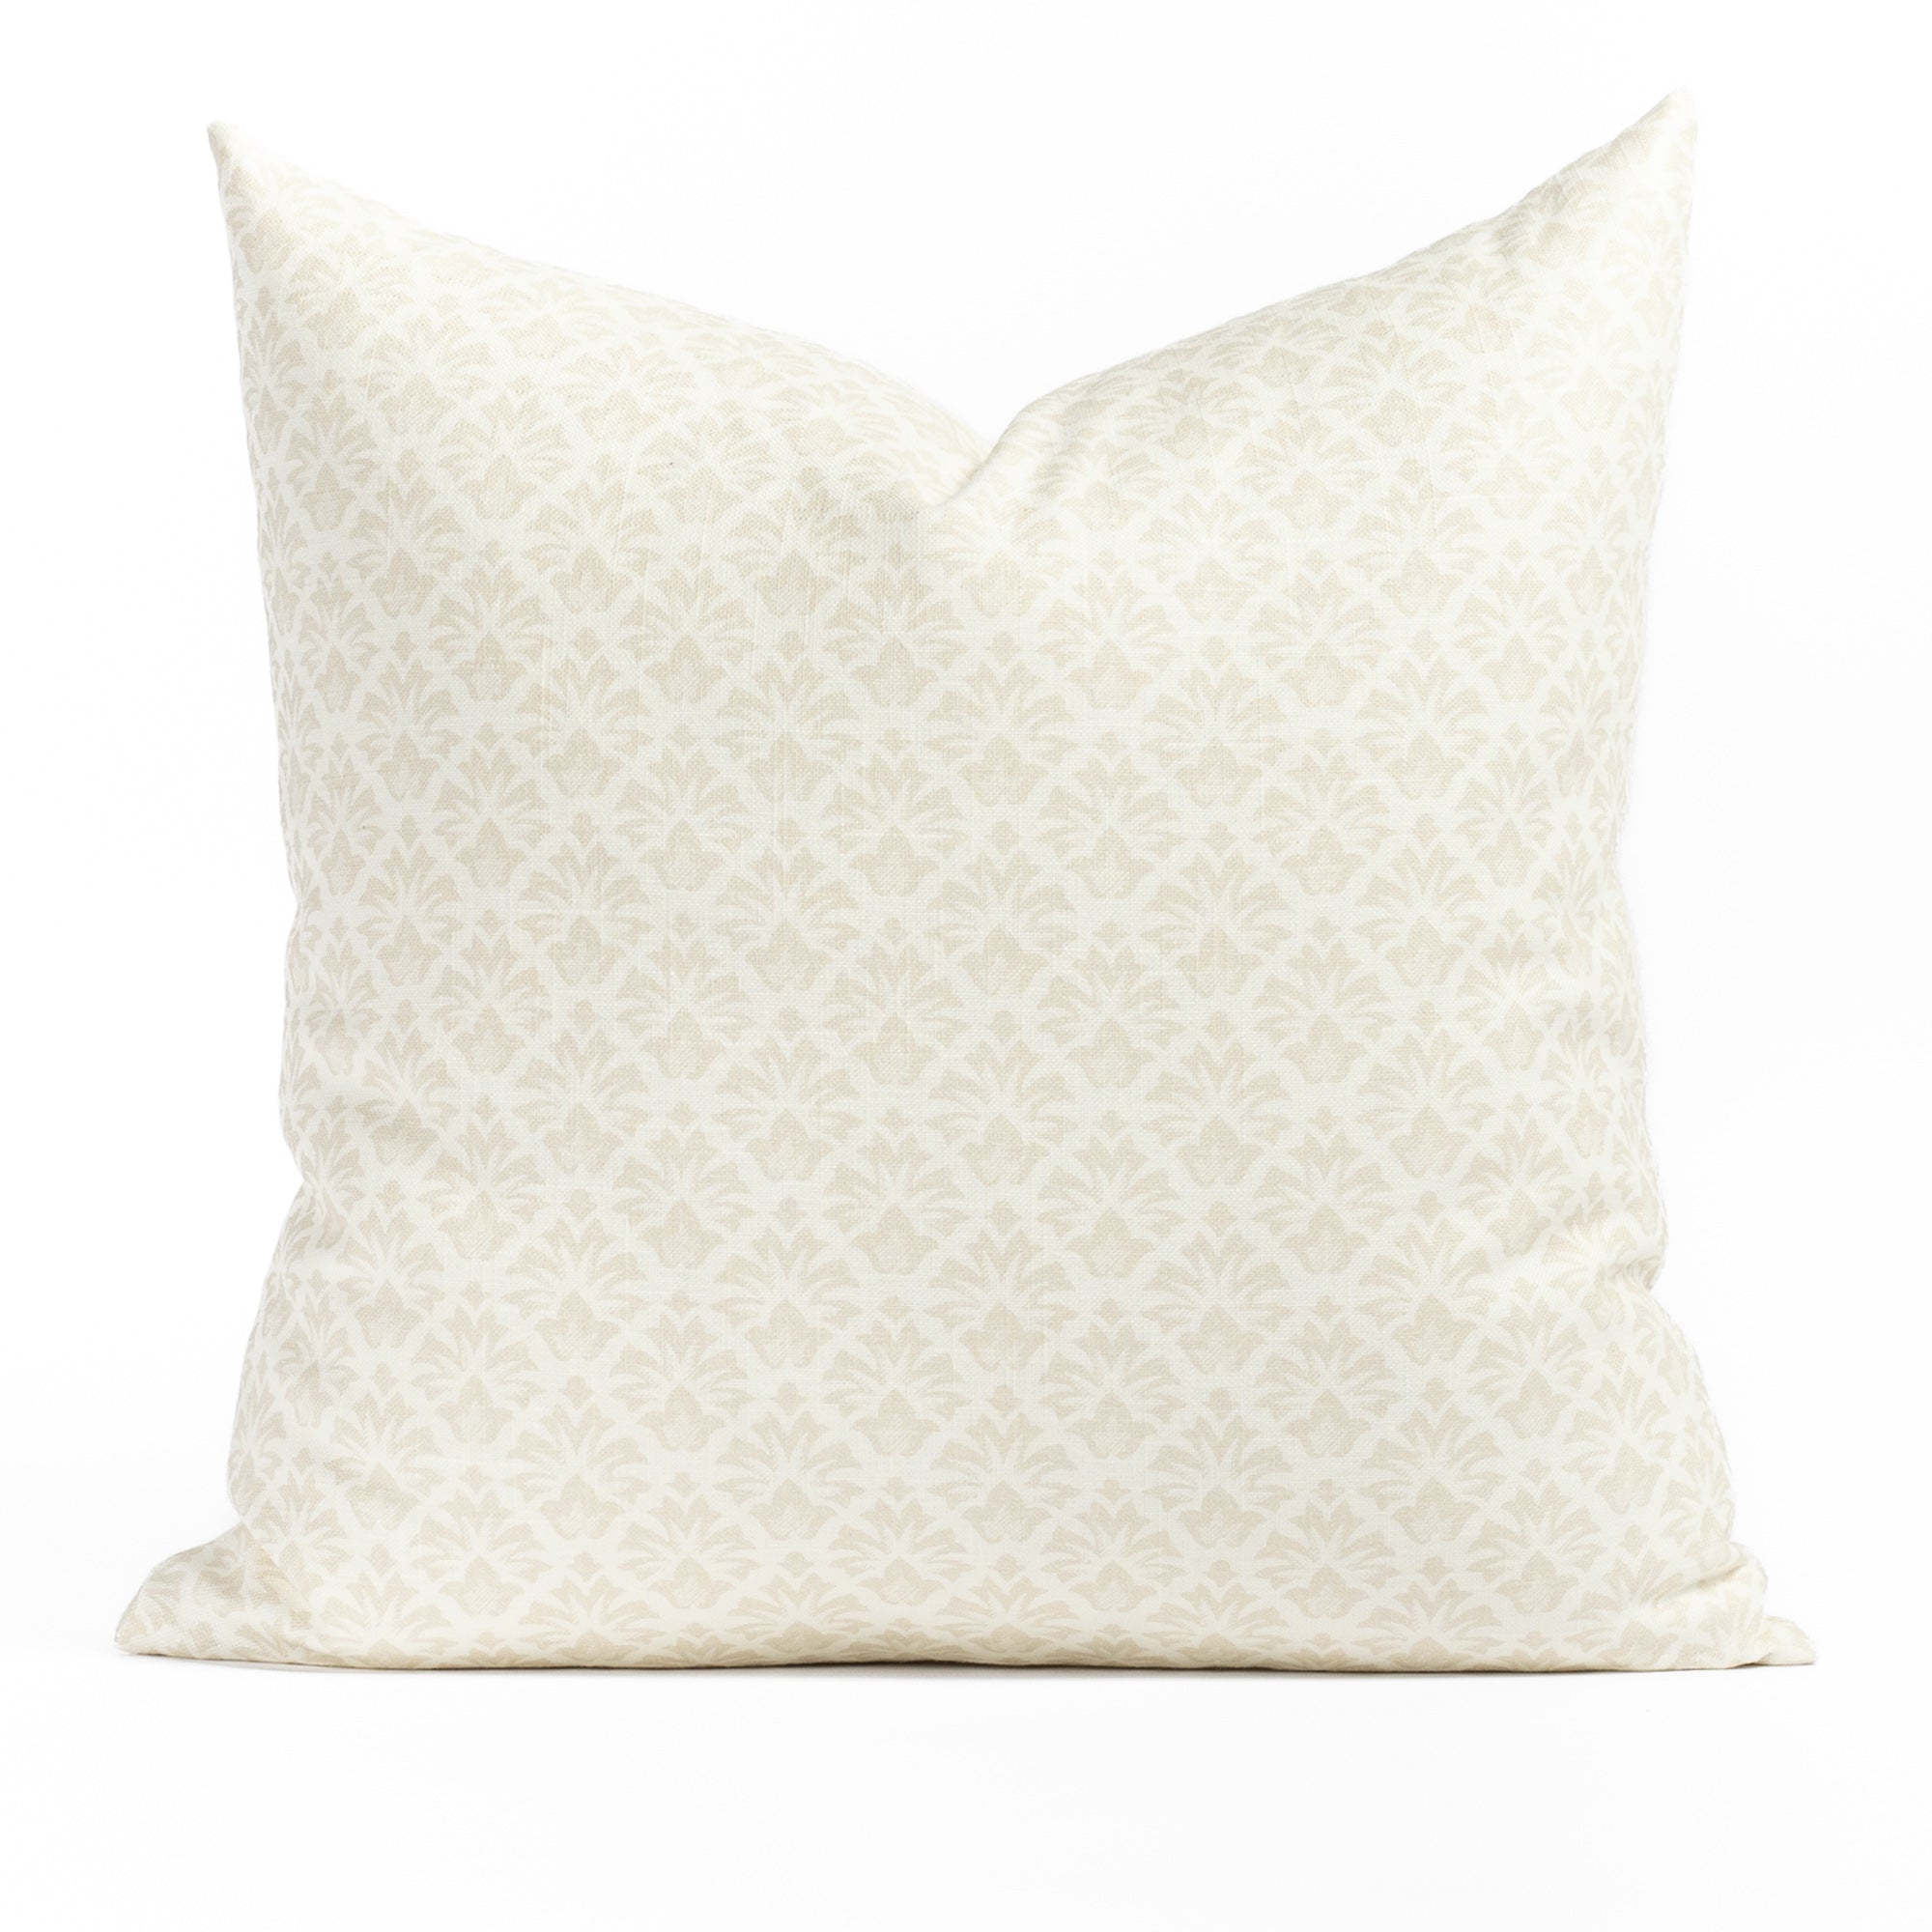 Calli 20x20 Pillow Parchment, a cream and putty beige floral block print throw pillow from Tonic Living